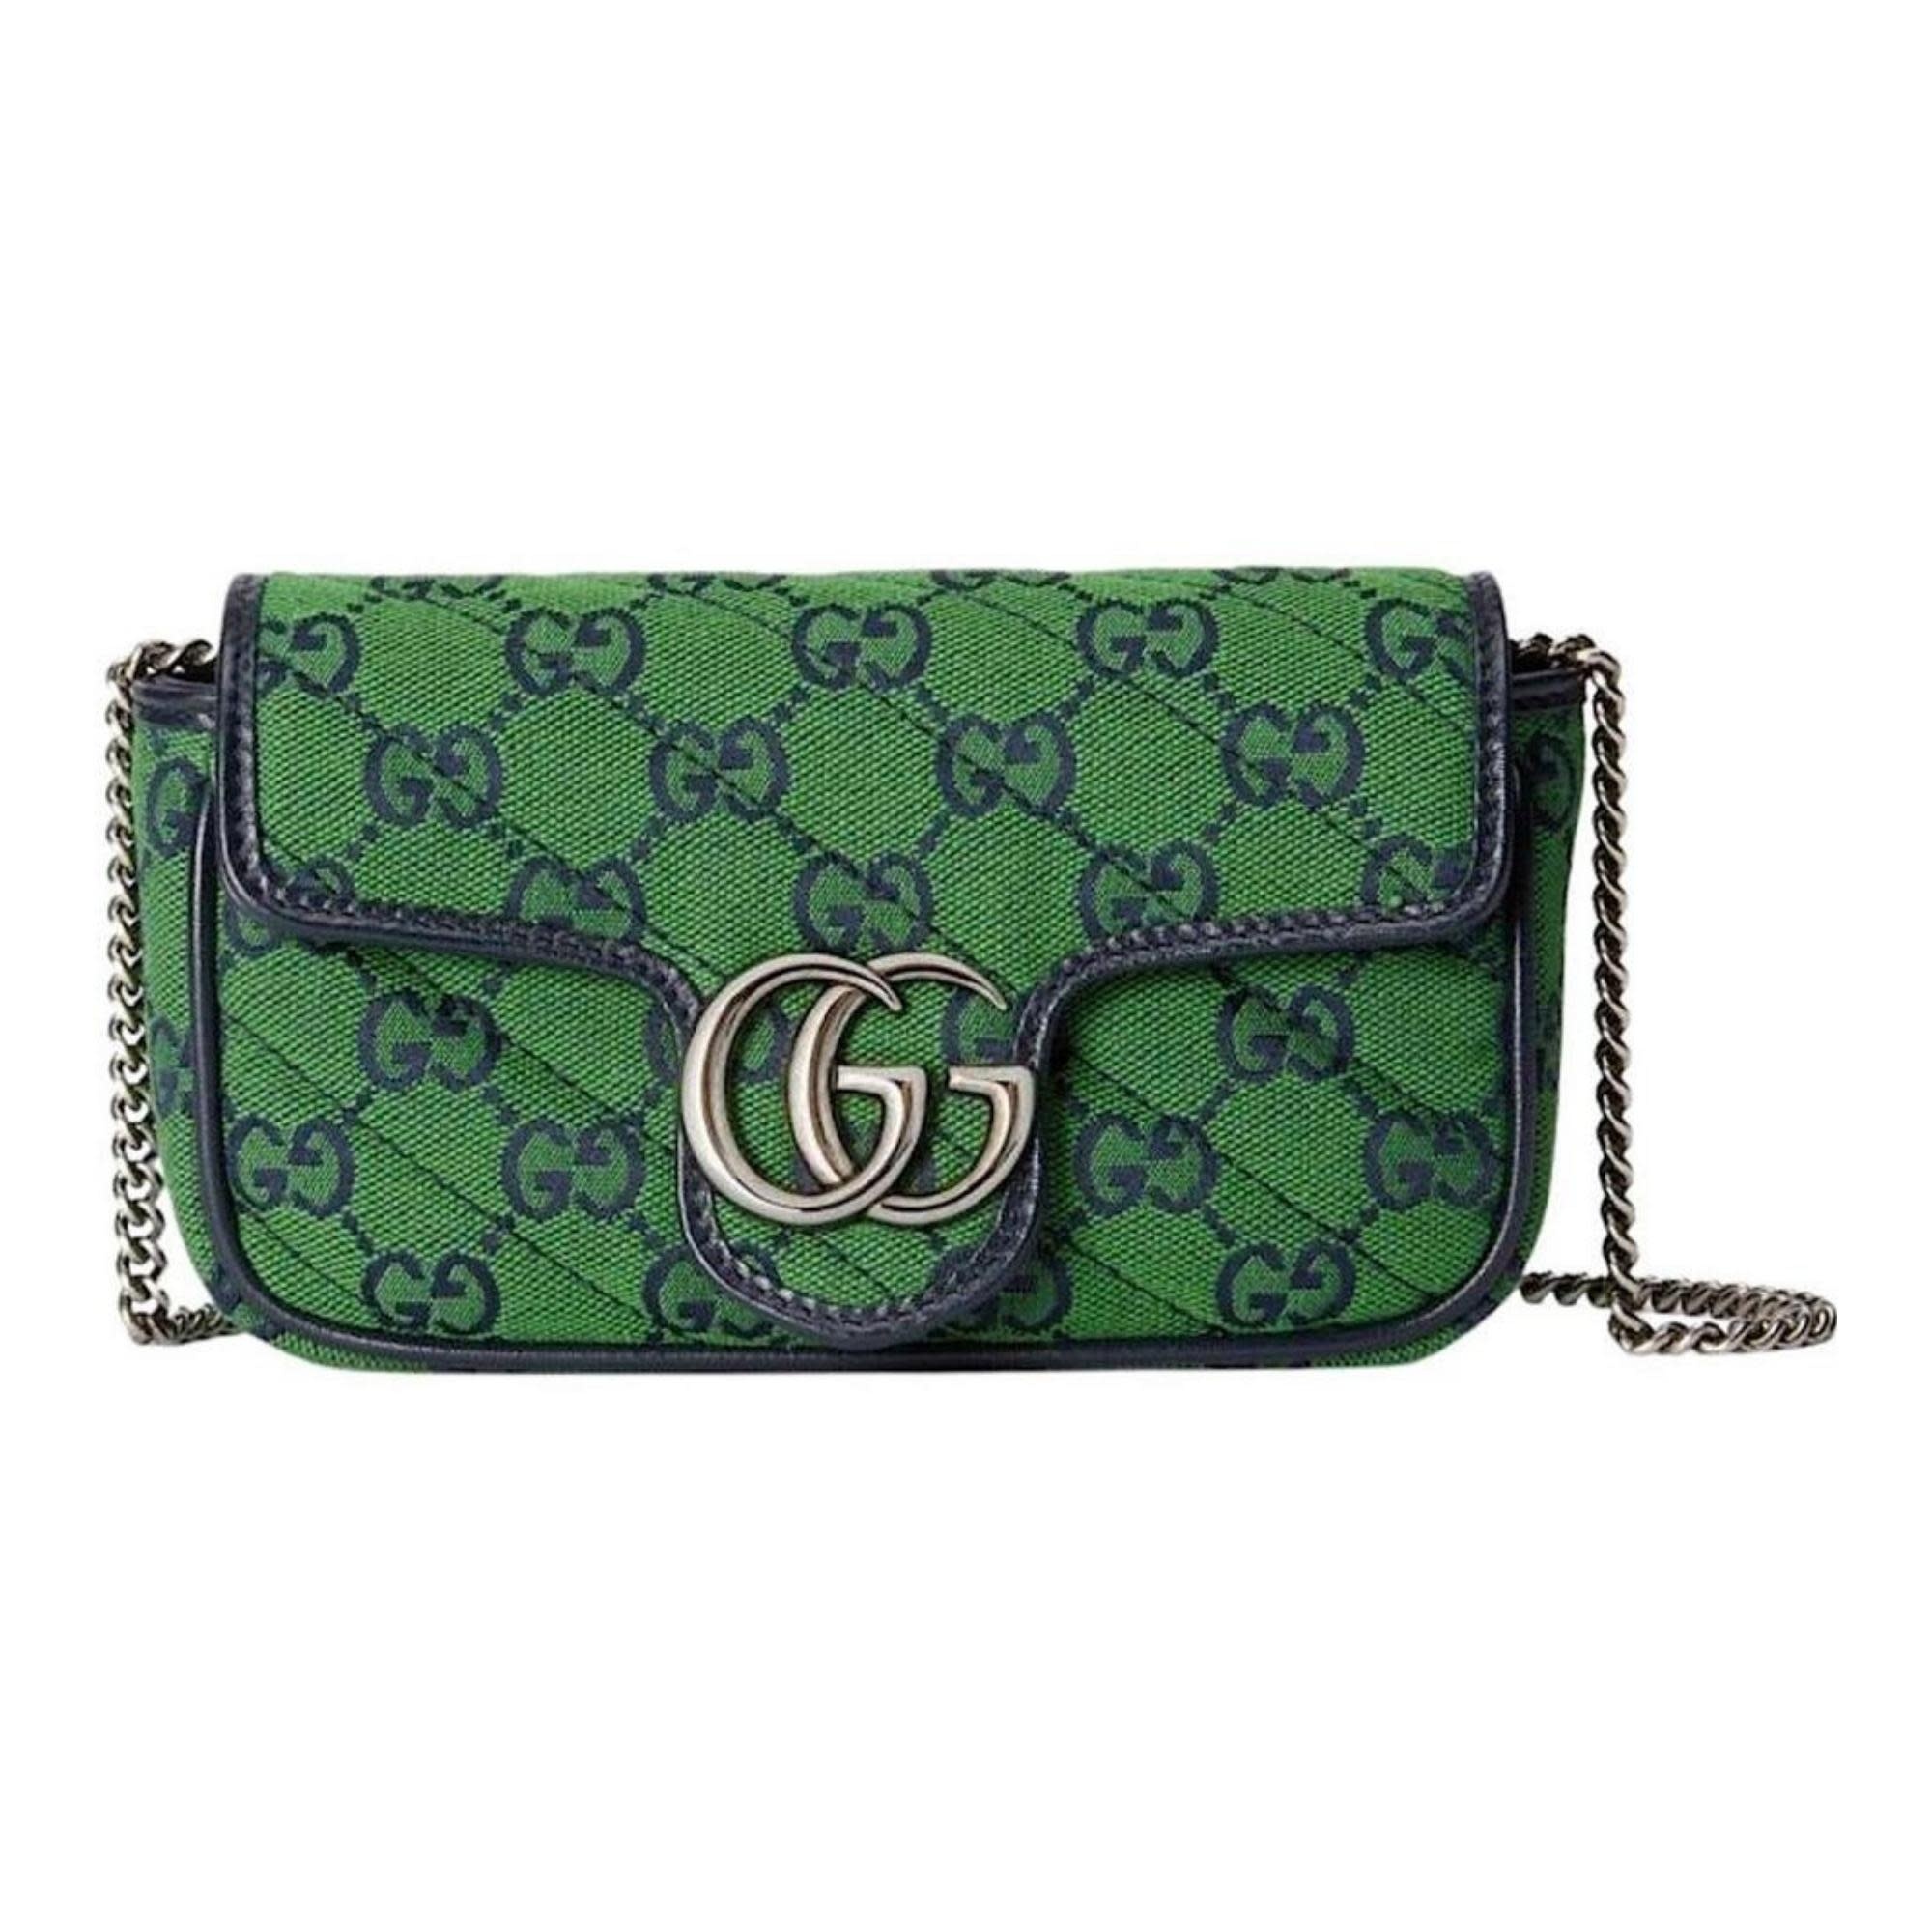 Mezone shopping - Gucci belt bag With dustbag Authentic